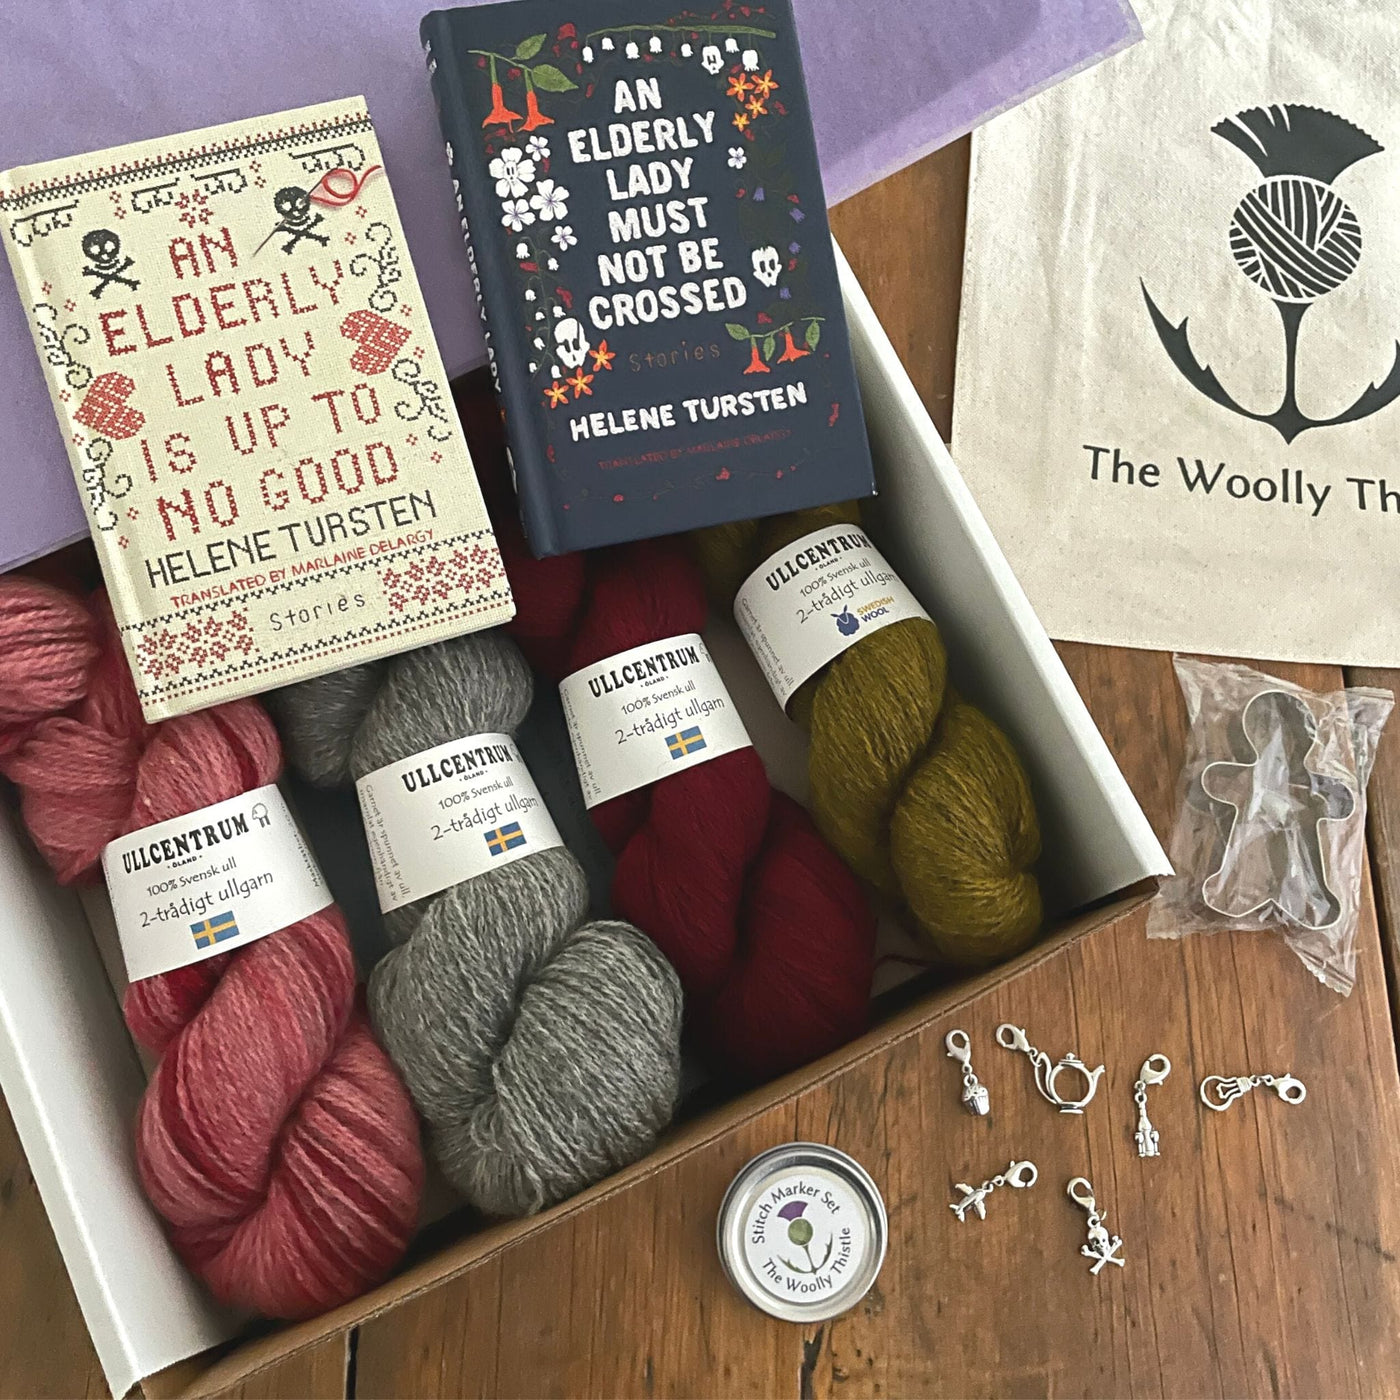 The Swedish Book Bundle components which include two books by Helene Tursten, TWT Tote bag, Stitch marker set, gingerbread cookie cutter, and Ullcentrum Sport Weight yarn. Components are shown partially in box and laid out on table. 